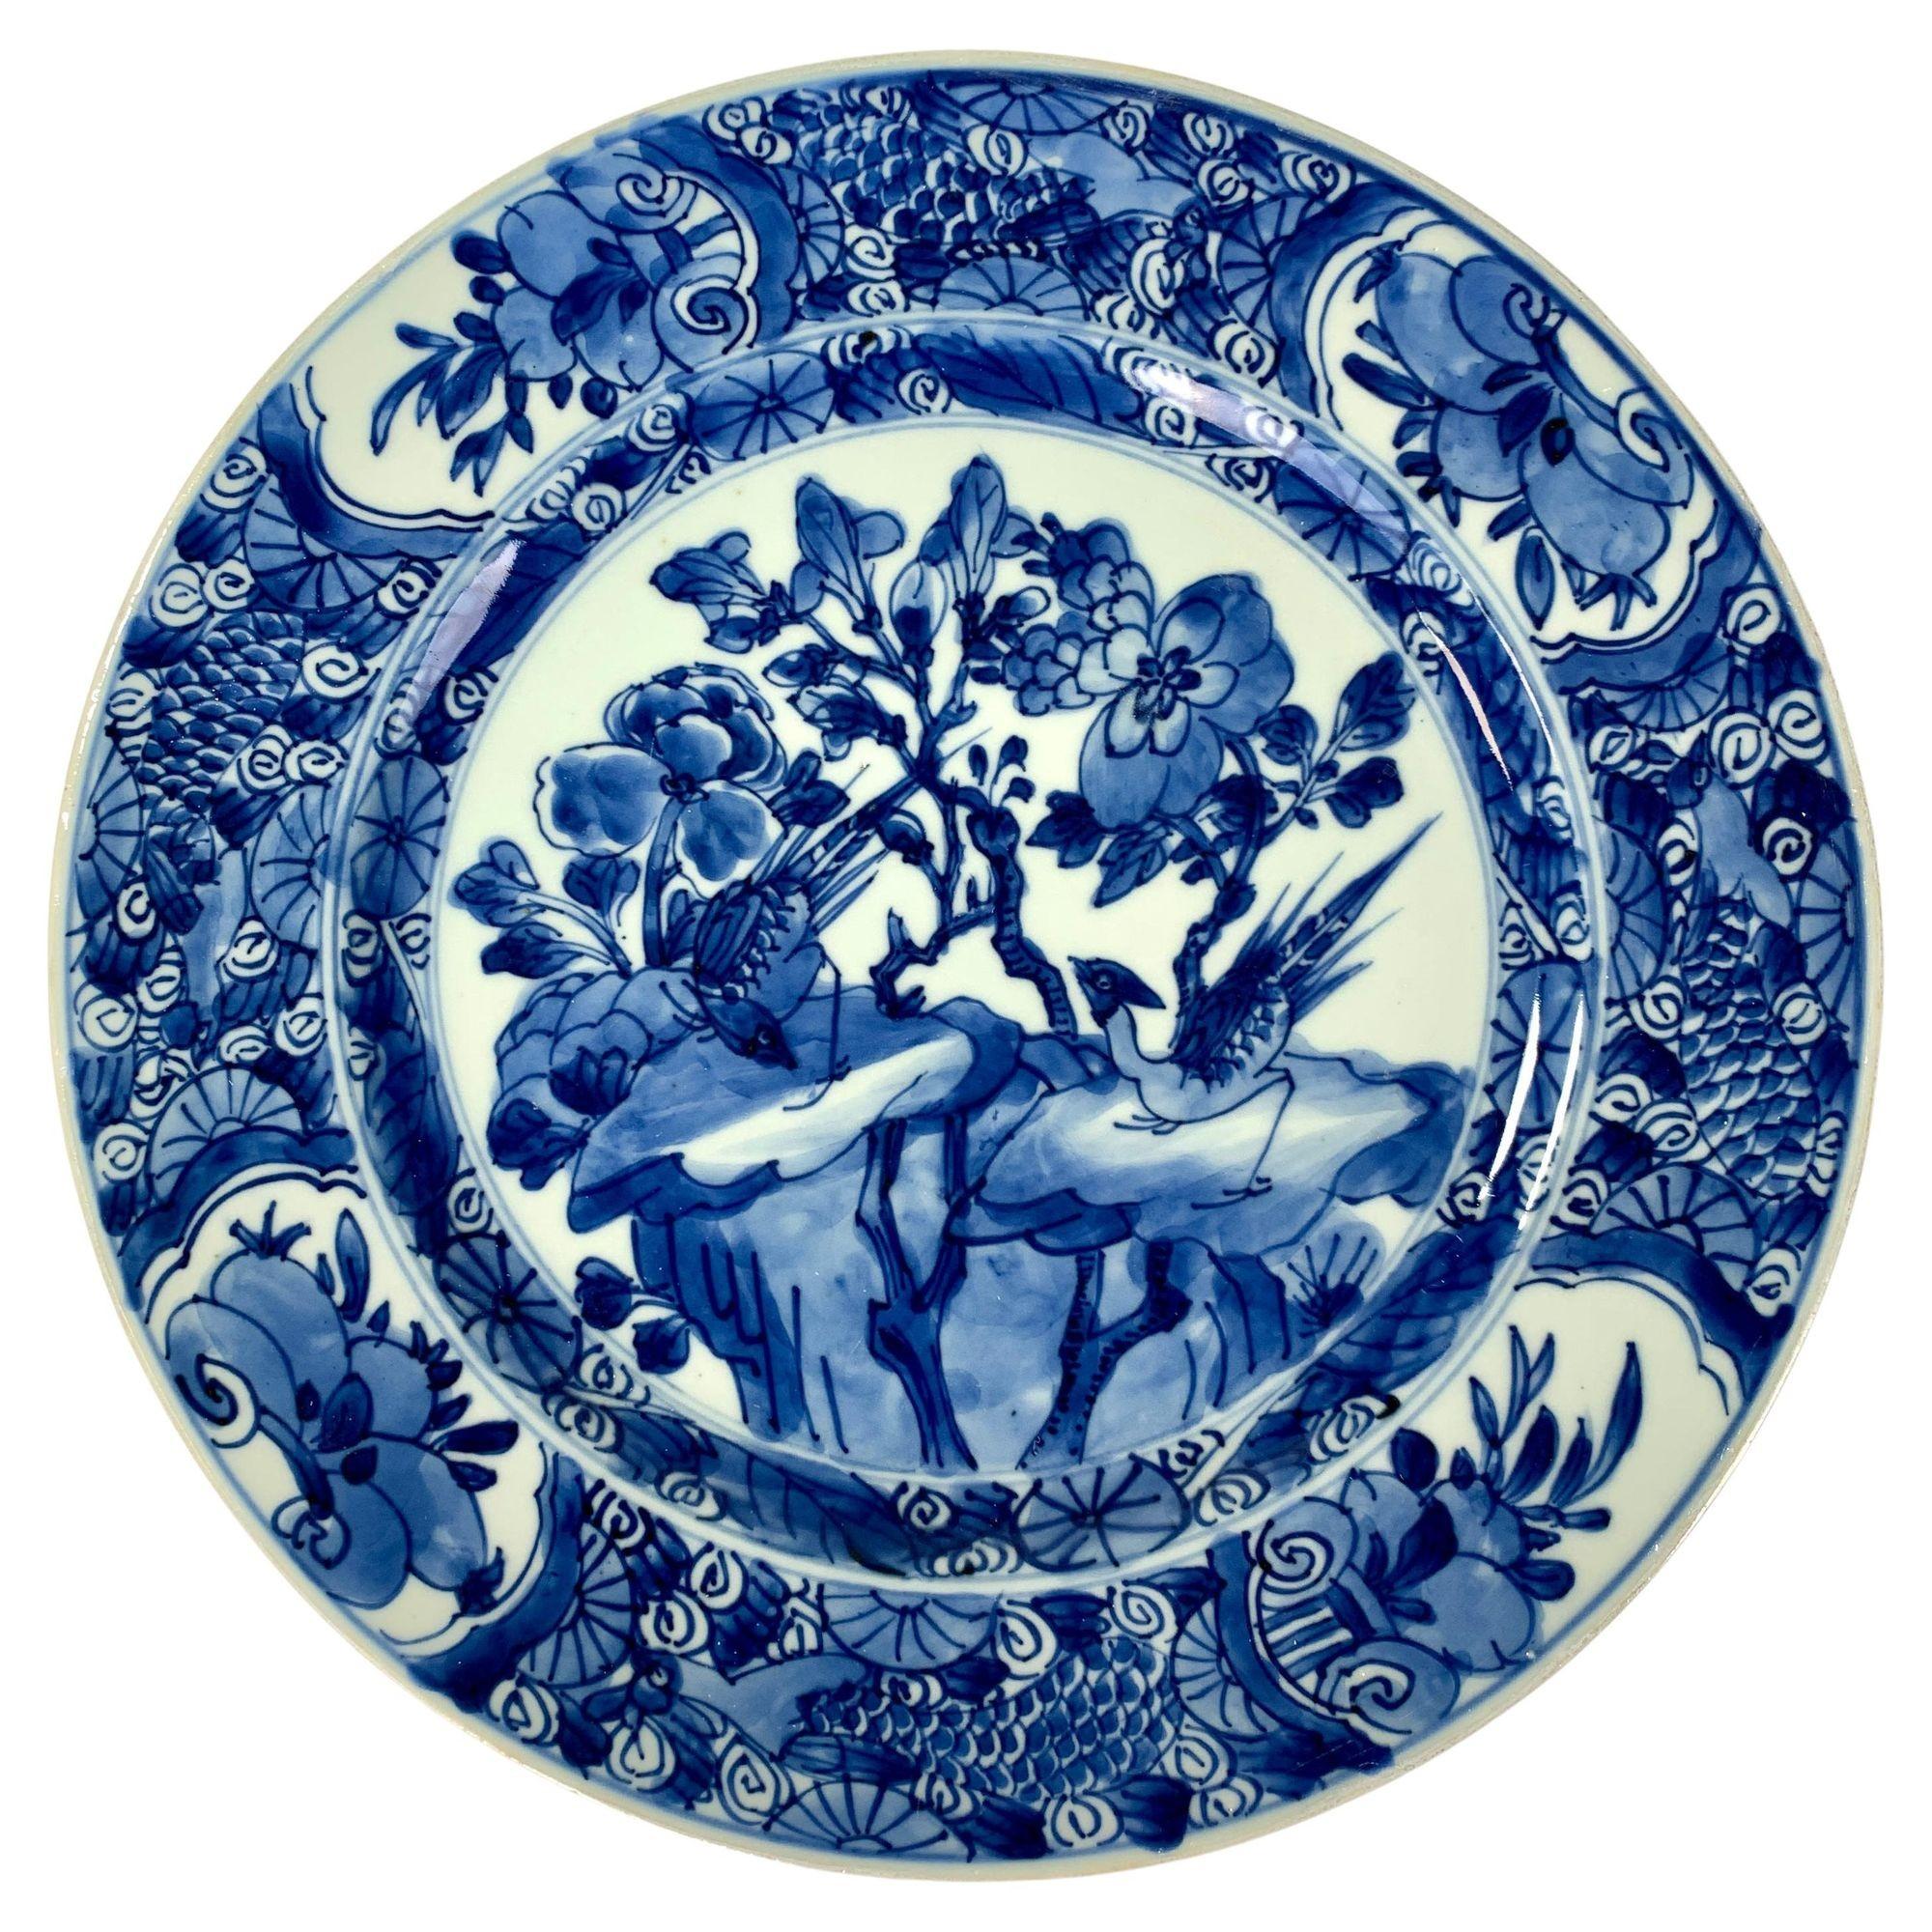 This set of six blue and white Chinese porcelain dishes was hand-painted 300 years ago, circa 1700, during the Kangxi dynasty. According to Sir Harry Garner, author of Oriental Blue and White, 